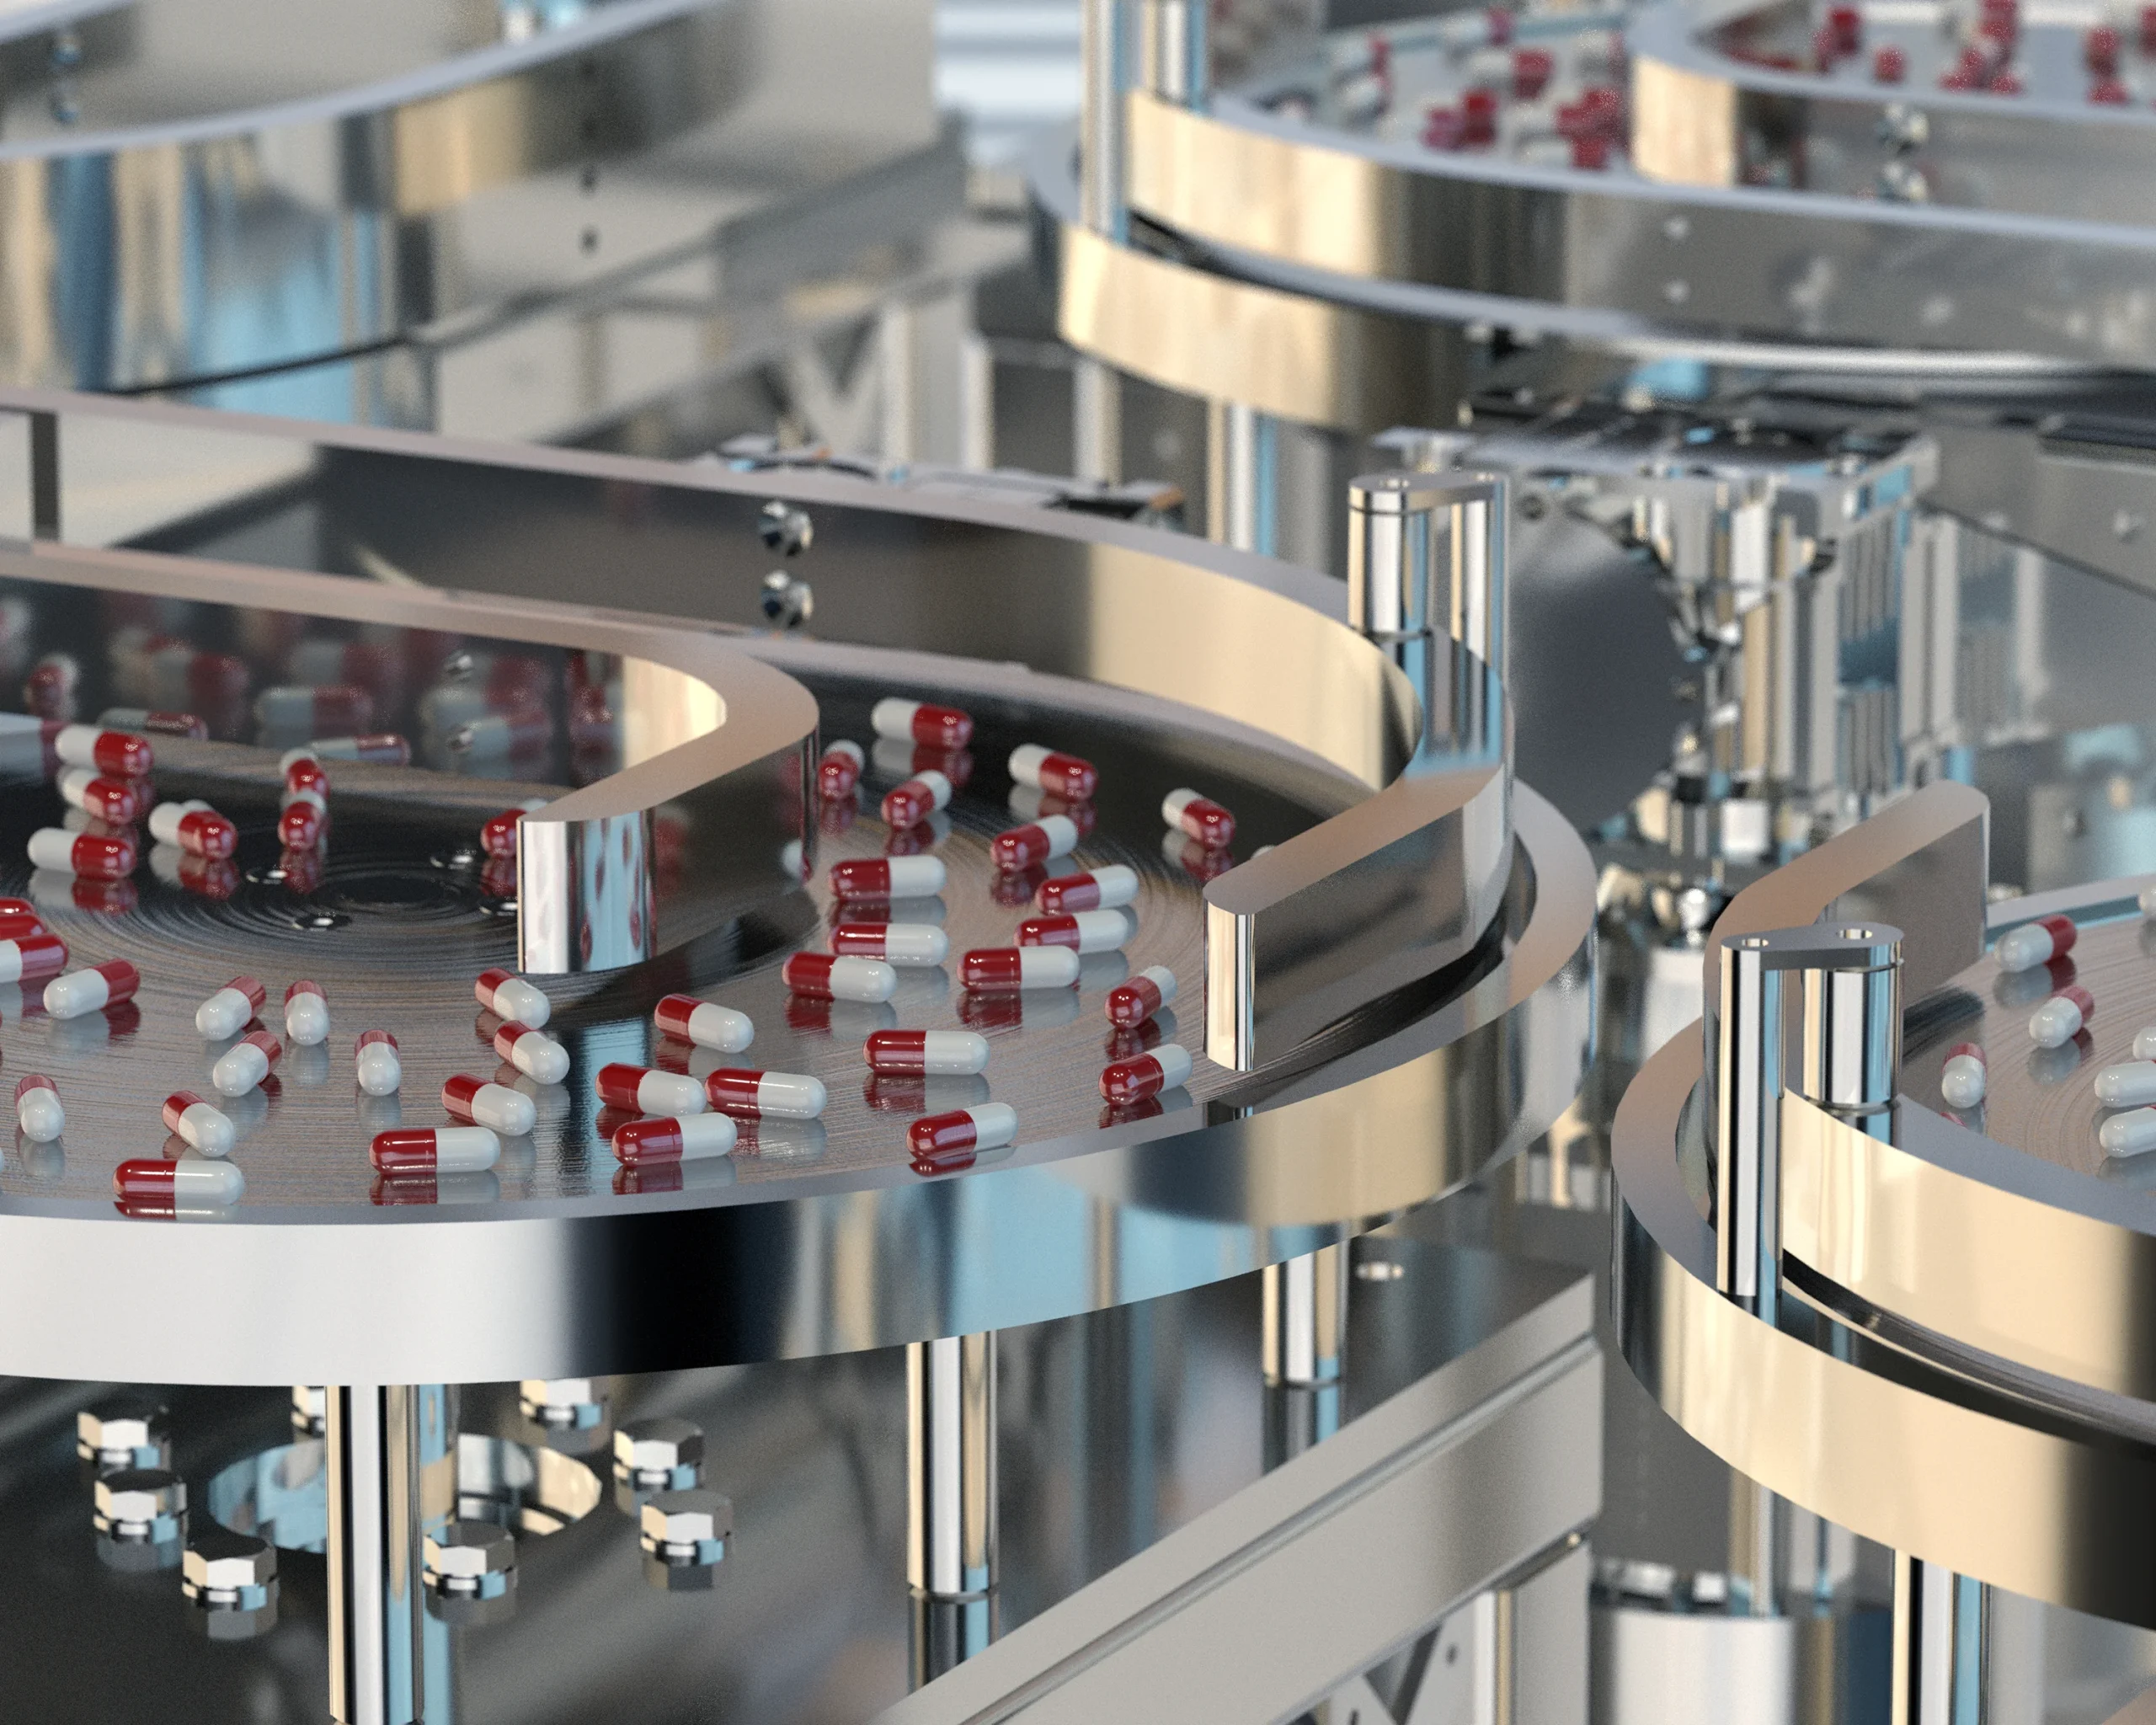 This image depicts a pharmaceutical industry factory, where a conveyor belt is carrying a multitude of pills